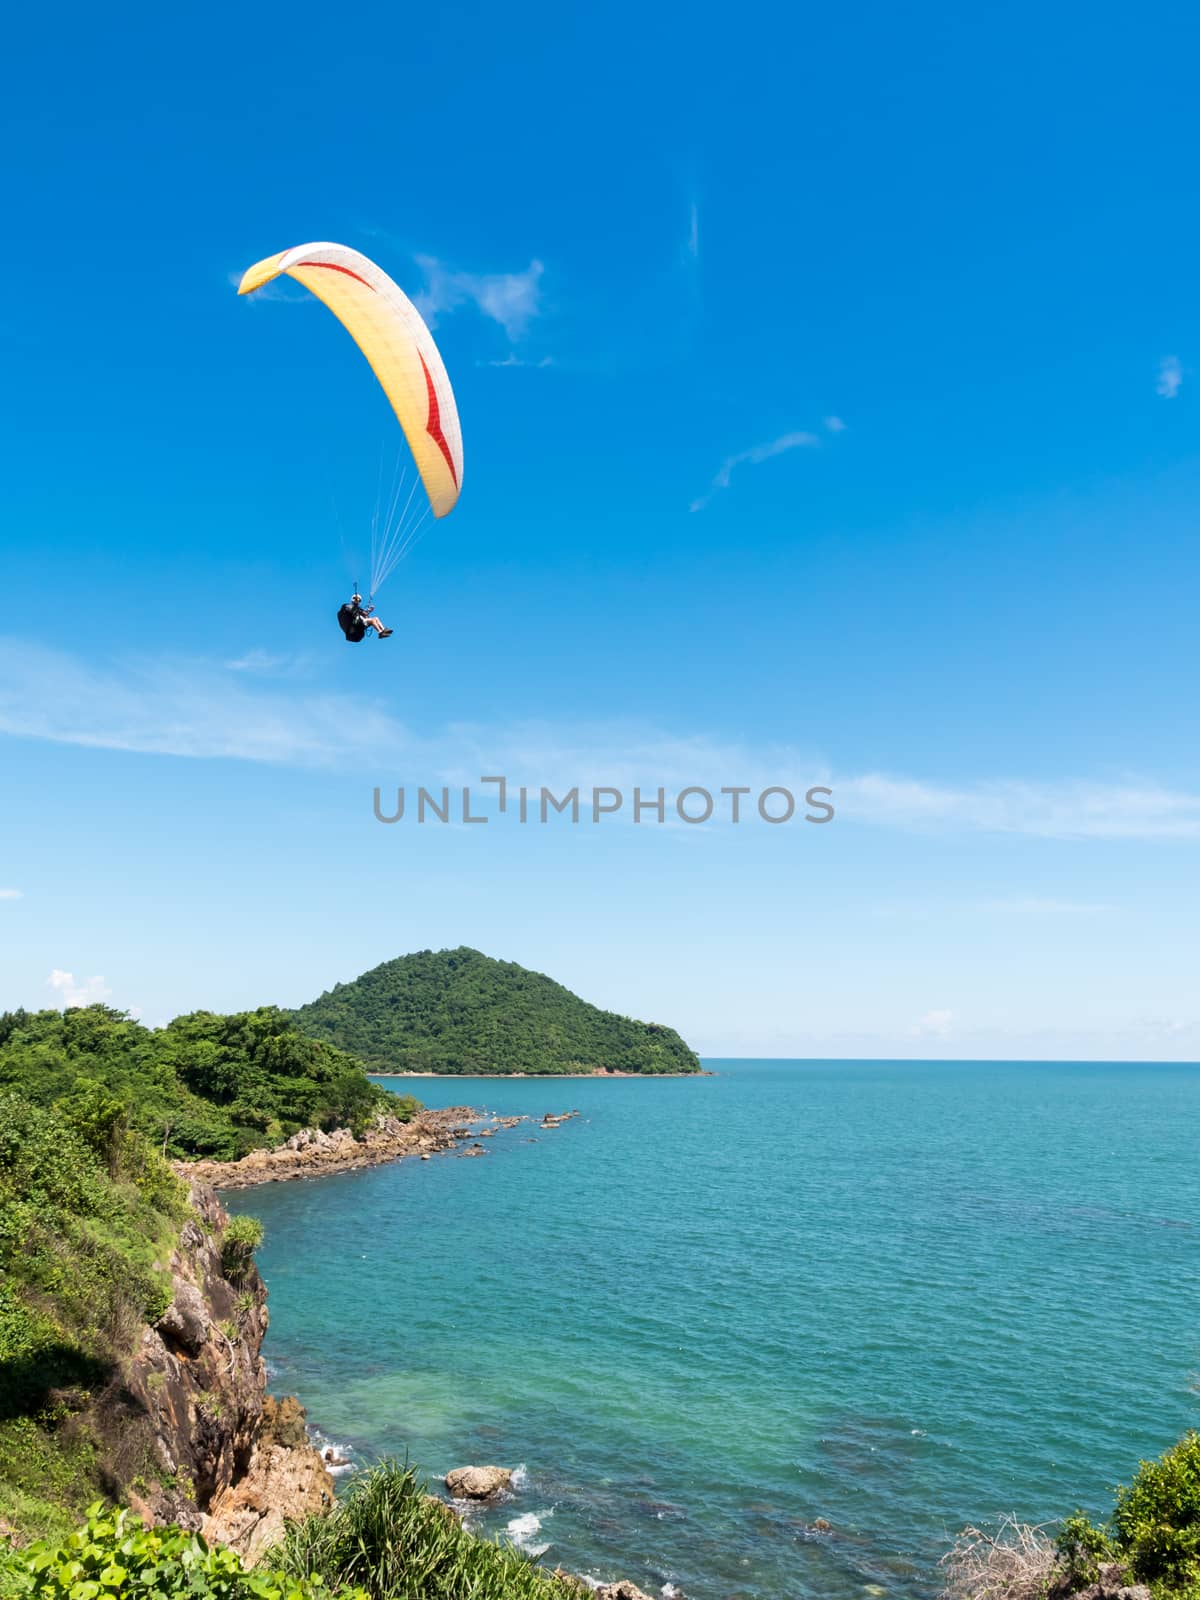 Beautiful seascape with Paraglider flying in blue sky. by ronnarong